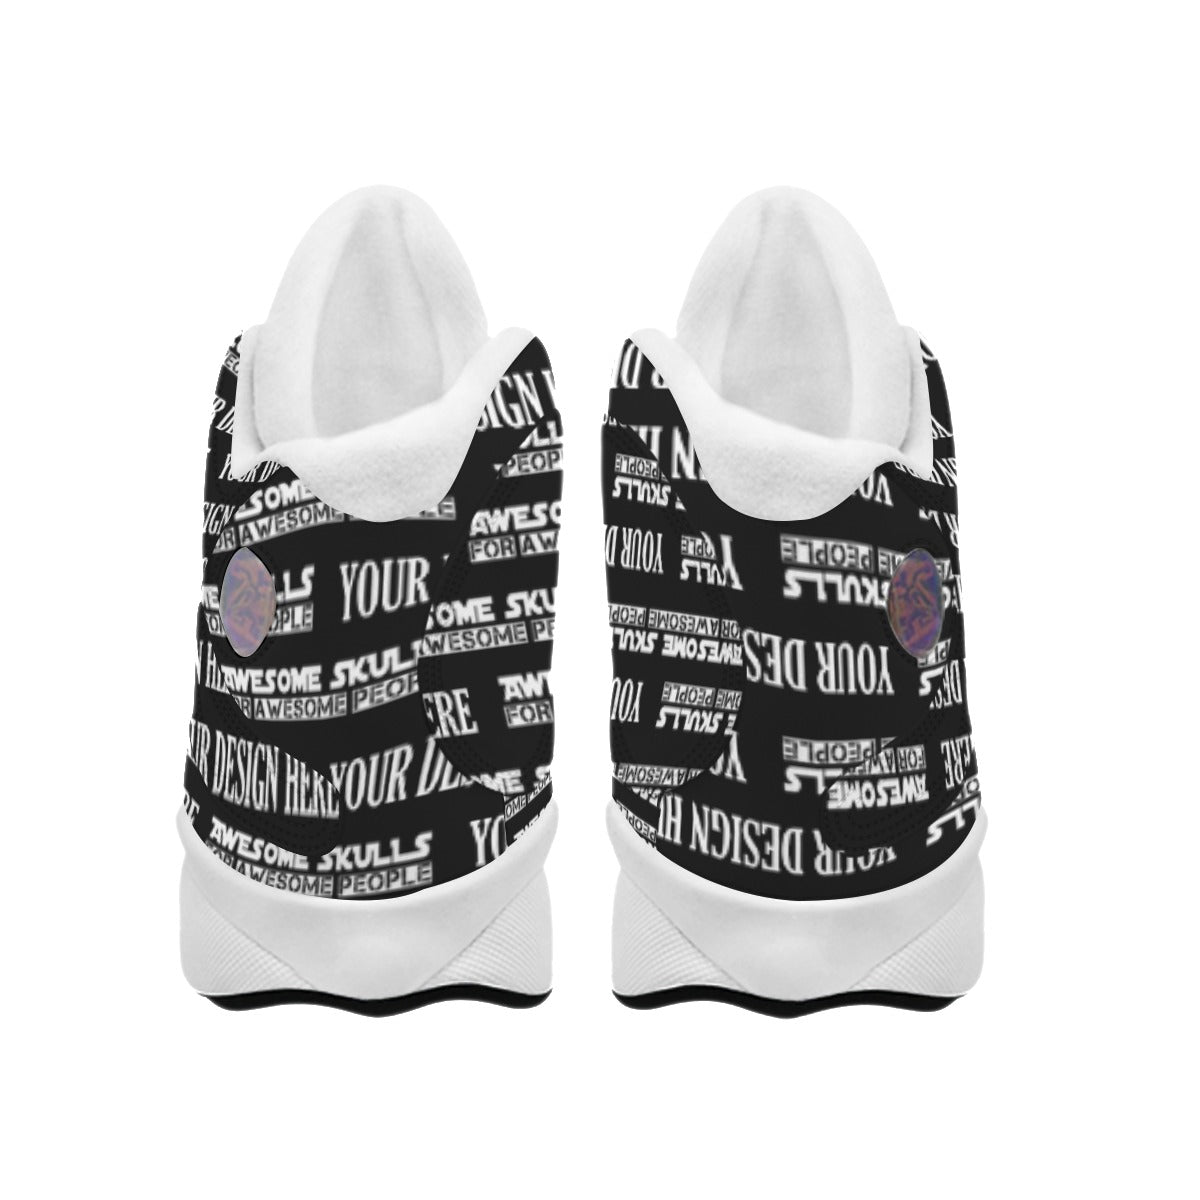 Custom Print on Demand POD Women's Curved Basketball Shoes With Thick Soles